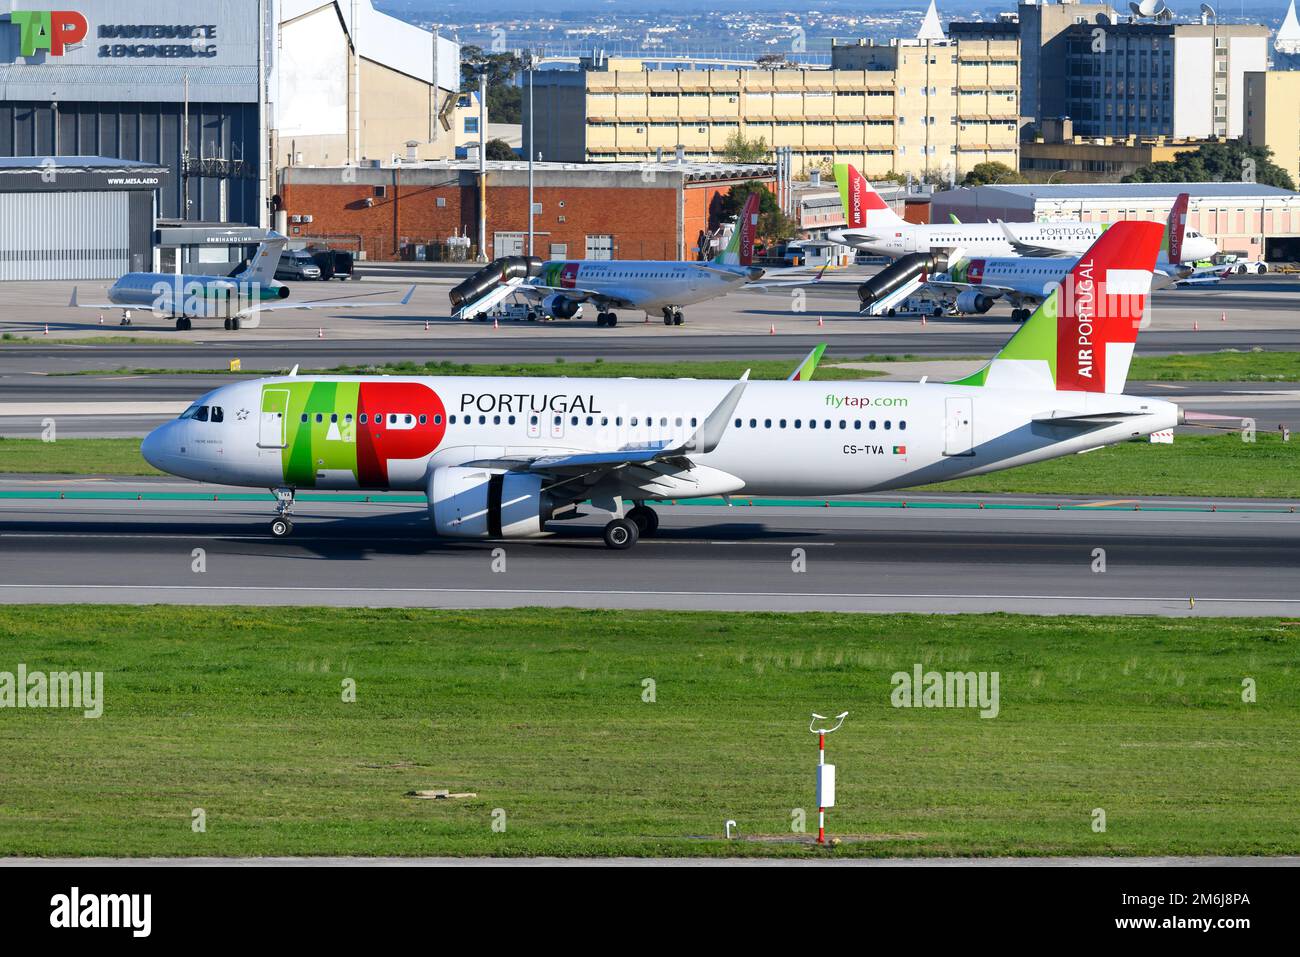 TAP Air Portugal Airbus A320neo aircraft landing. Airplane A320 NEO of portuguese airline TAP Portugal arriving at Lisbon Airport. Stock Photo